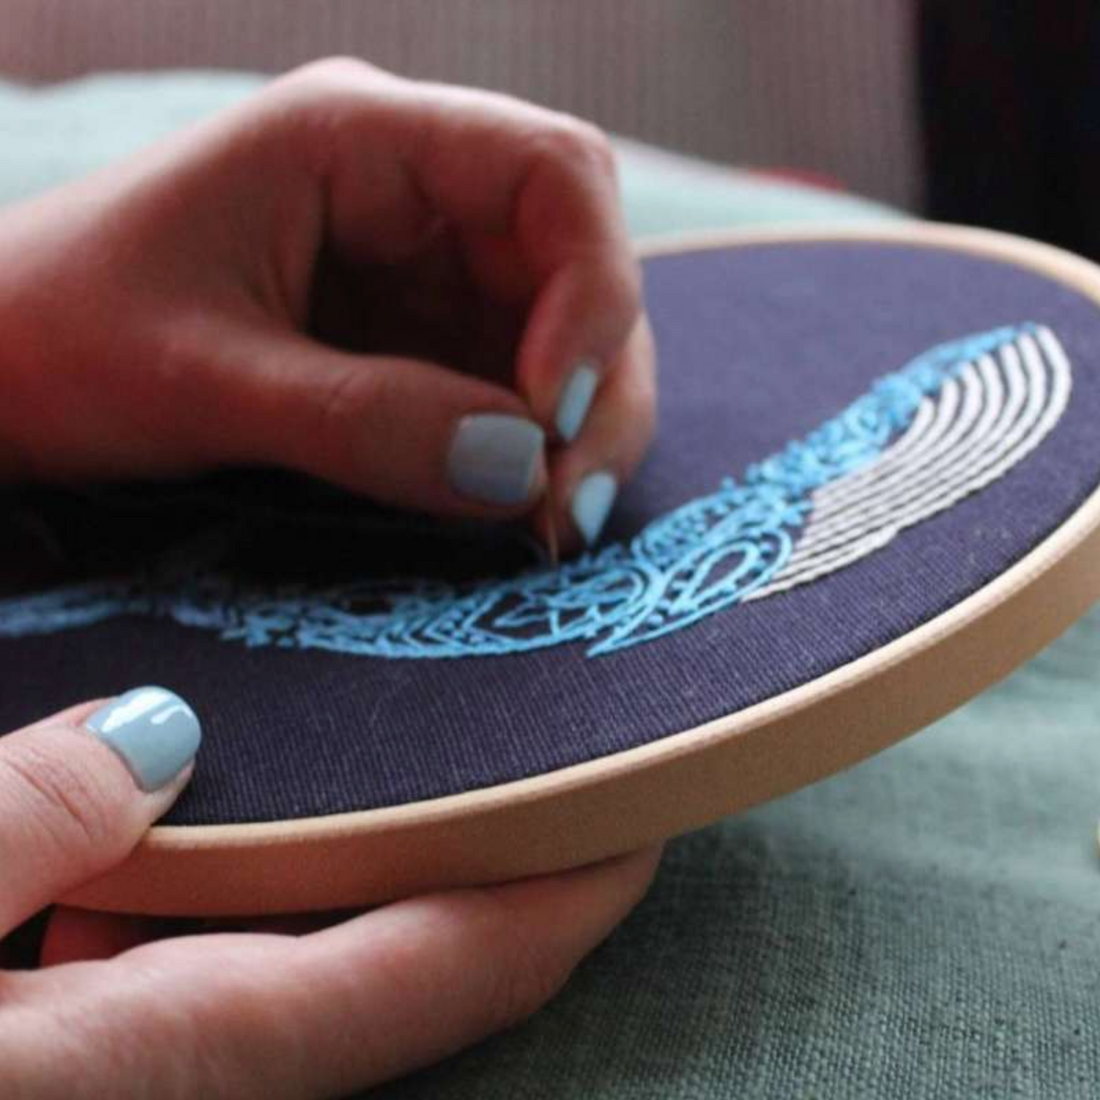 HOOP EMBROIDERY KIT | WHALE